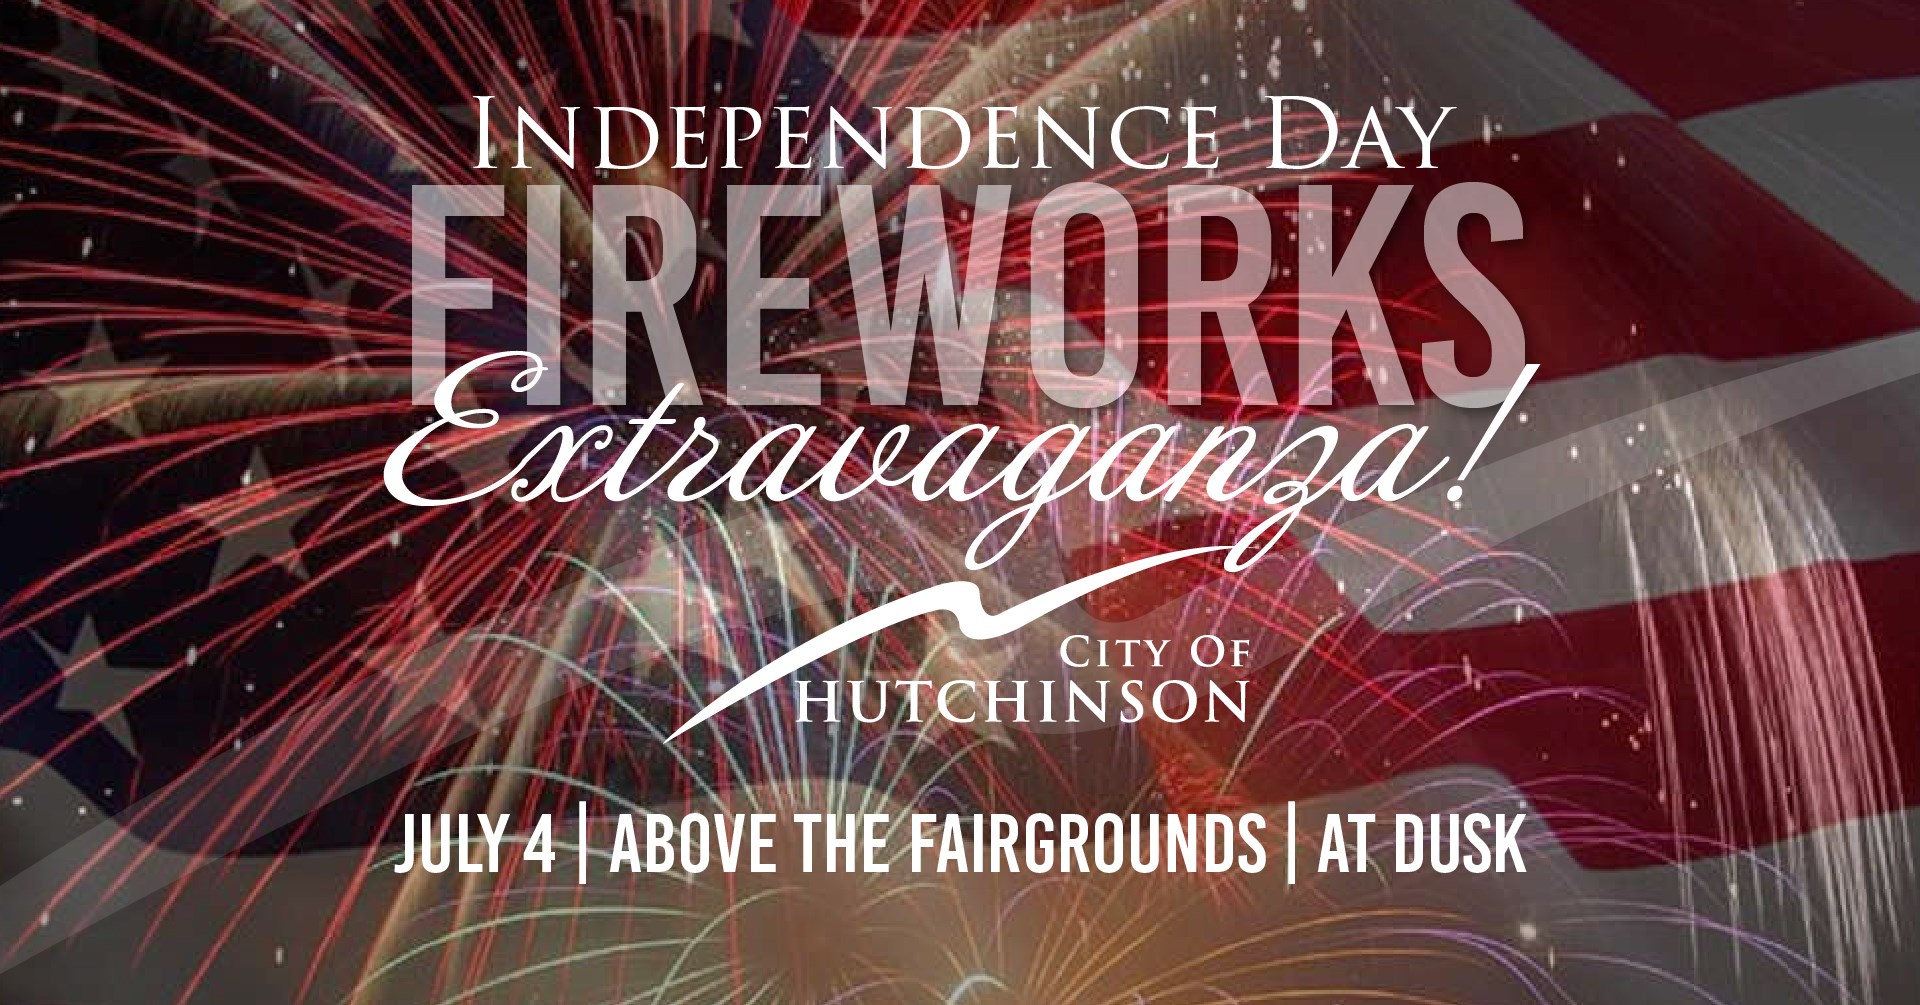 Event Promo Photo For City of Hutchinson Fireworks Display